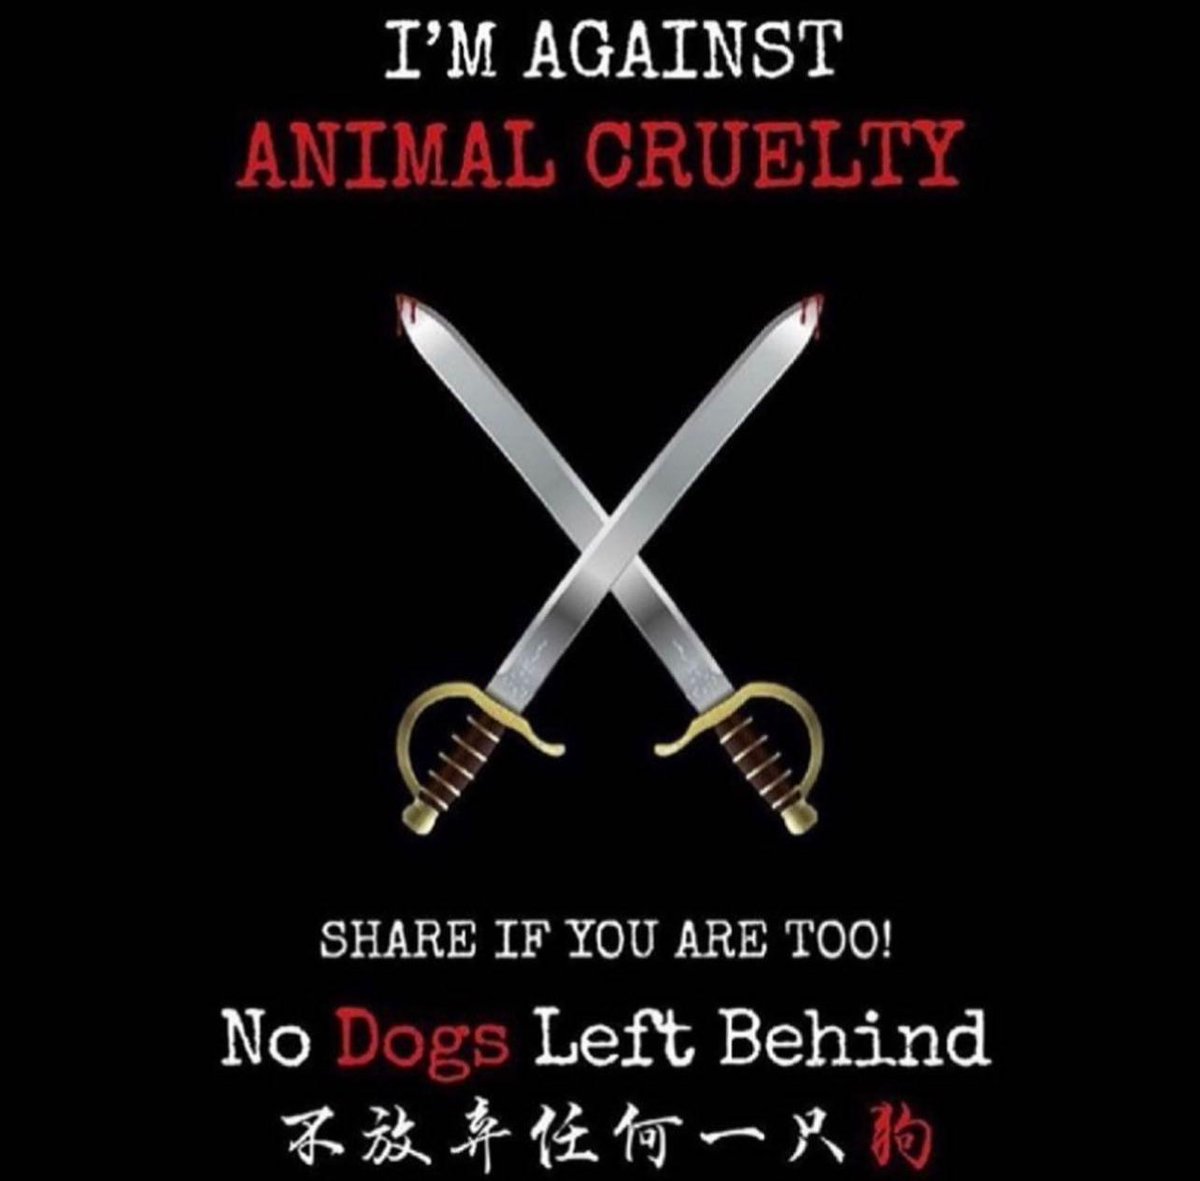 April is Prevention of Cruelty to Animals Month. Please Retweet. Learn more how you can help end the cruelty at nodogsleftbehind.com

#EndDogMeat #stopdogmeat #NoDogMeat #endanimalcruelty #AnimalRescue #AnimalWelfare
#AnimalCrueltyPreventionMonth #stopanimalcruelty